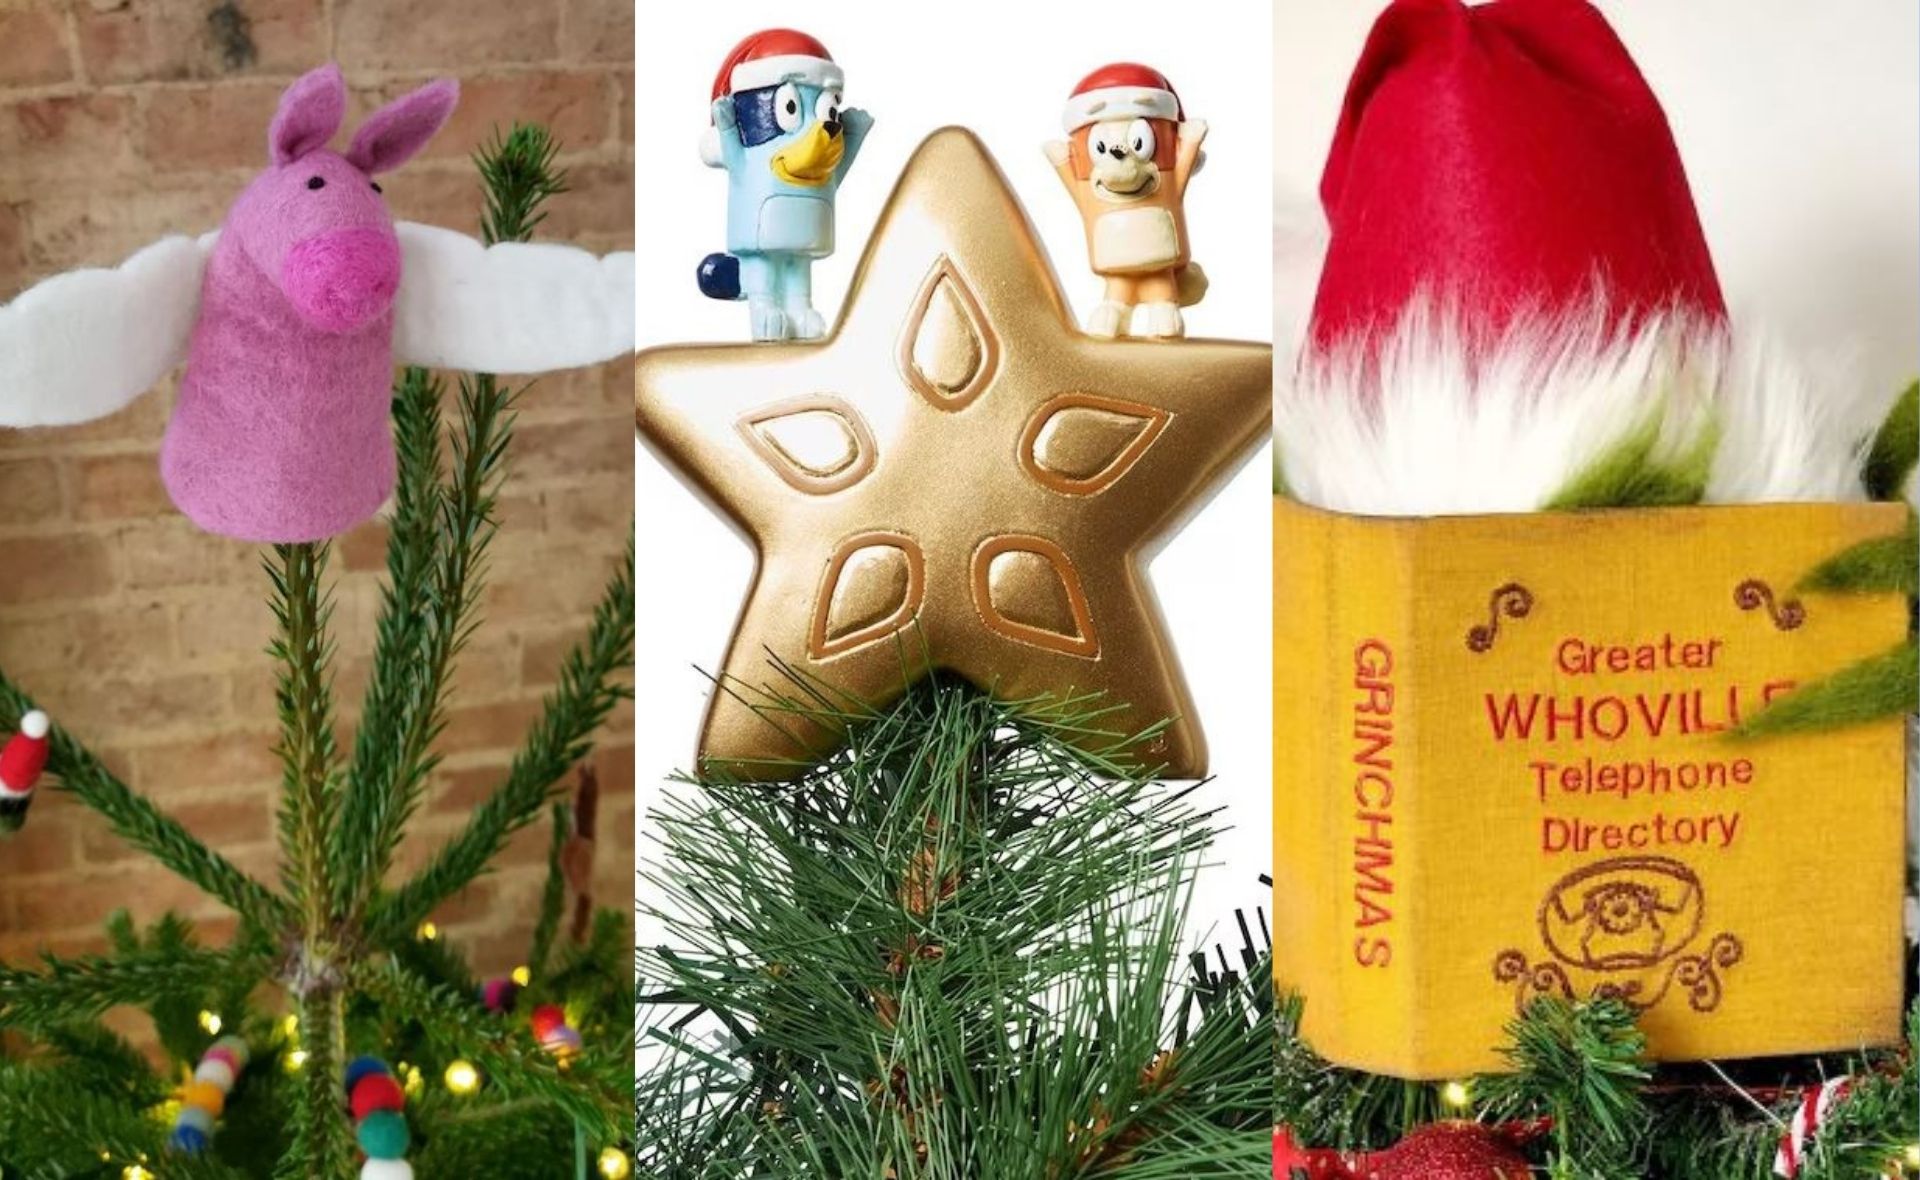 These have to be the best Christmas tree toppers on the web